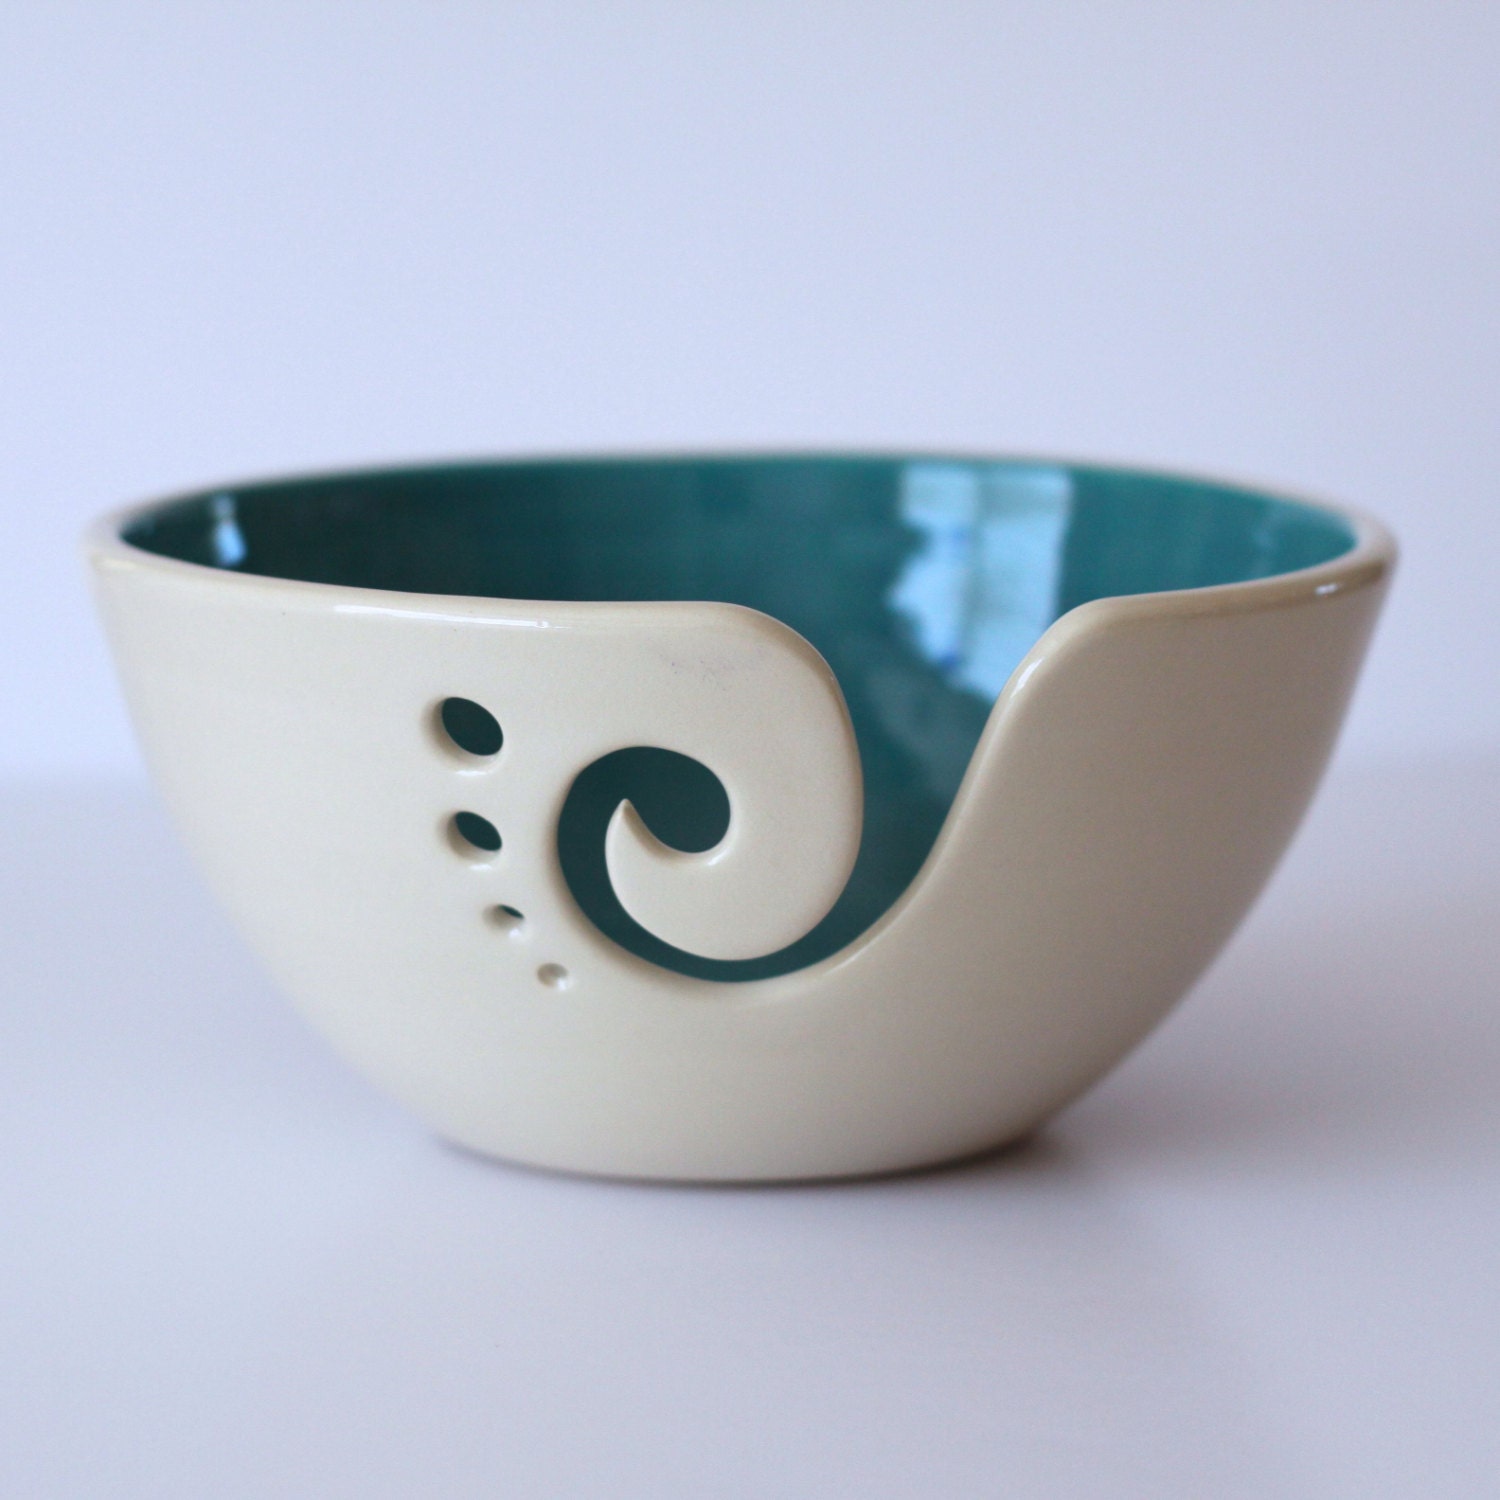 Hand Painted Ceramic Yarn Bowl for Knitting and Crochet YB149 